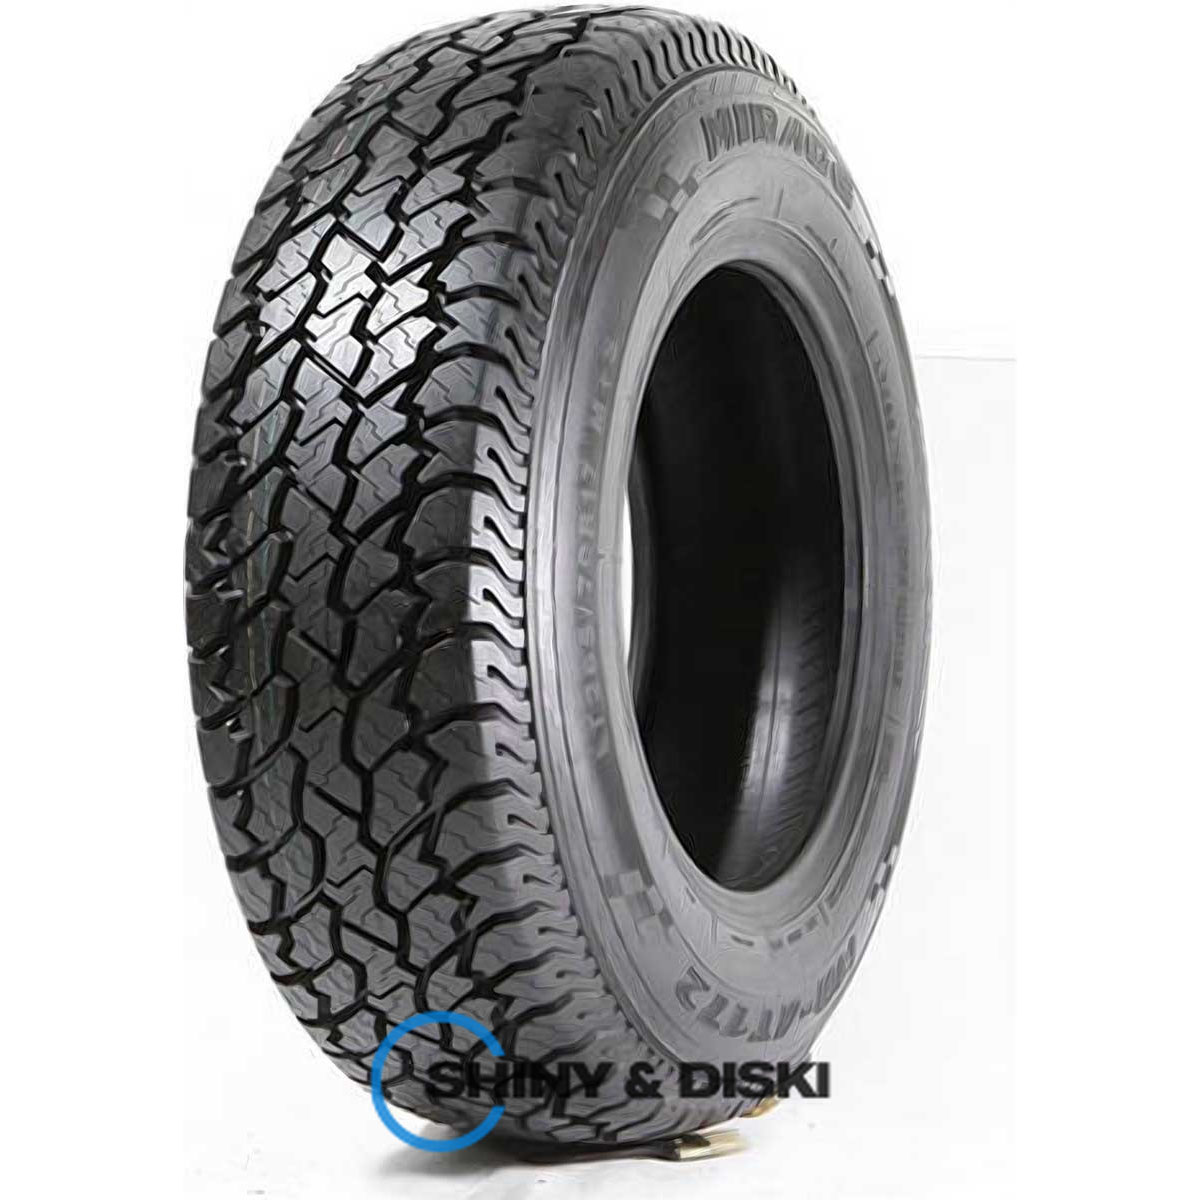 mirage mr-at172 285/70 r17 117t